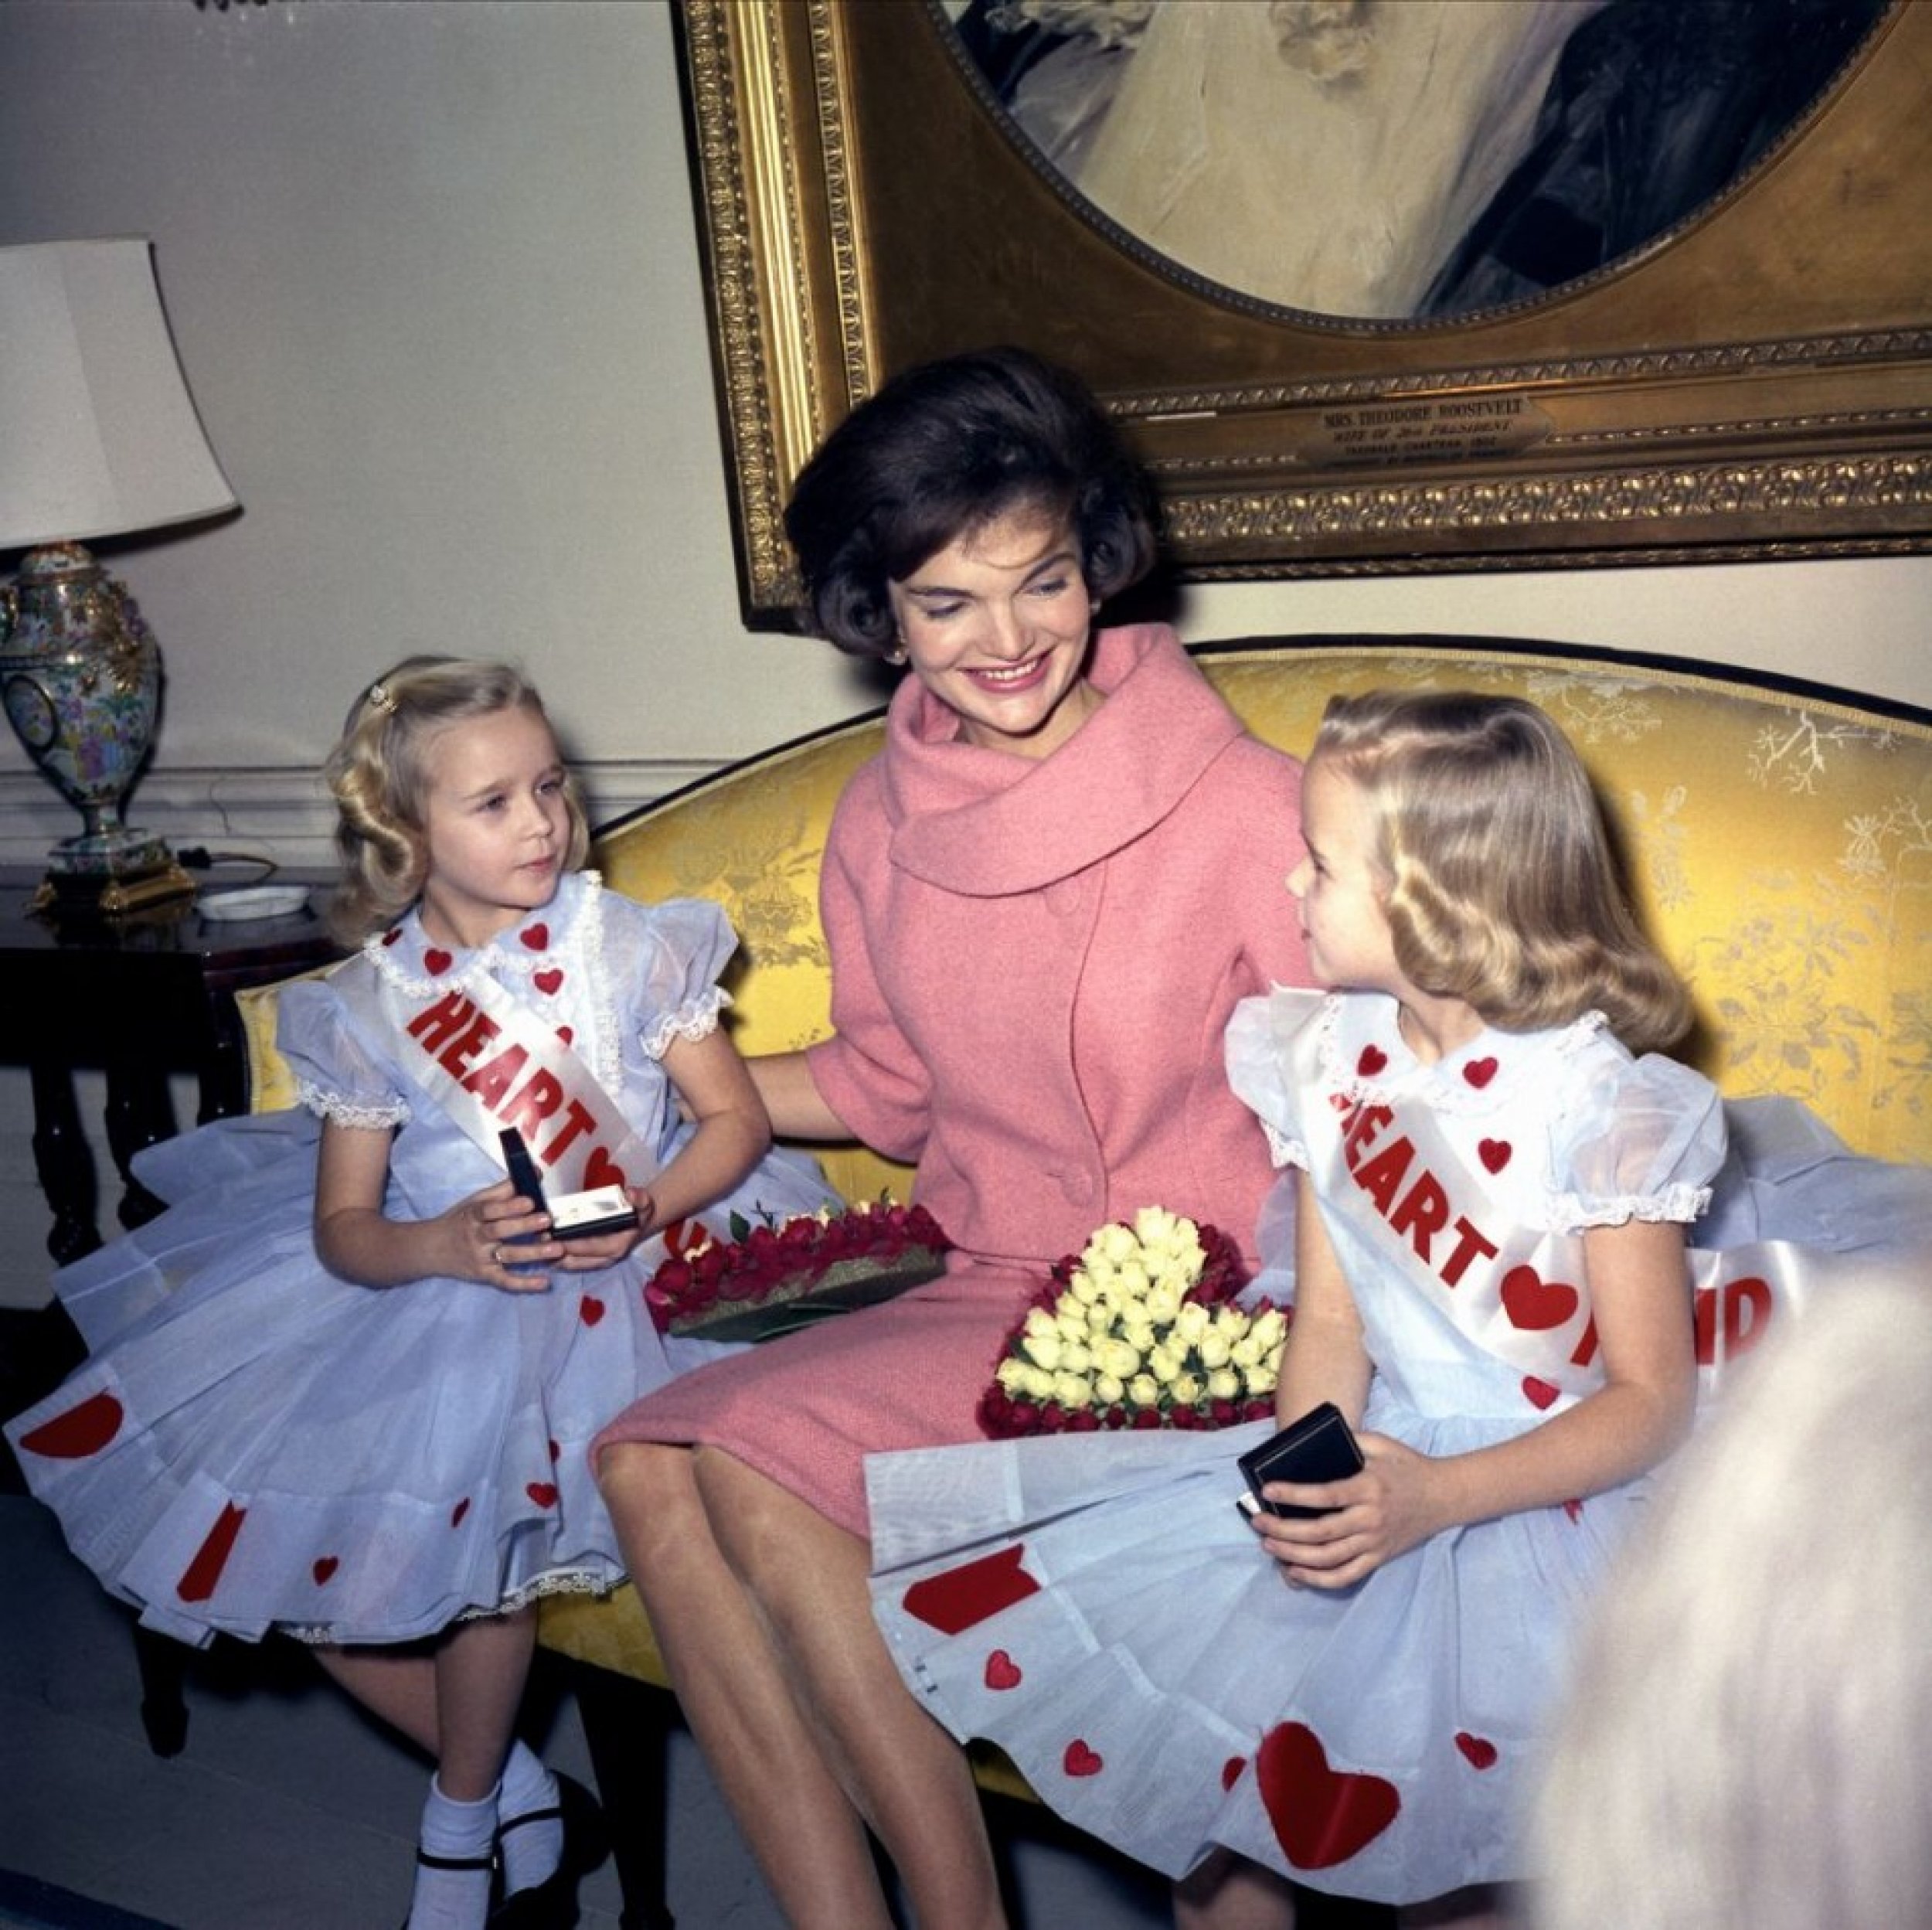 Jackie Kennedy had a signature style